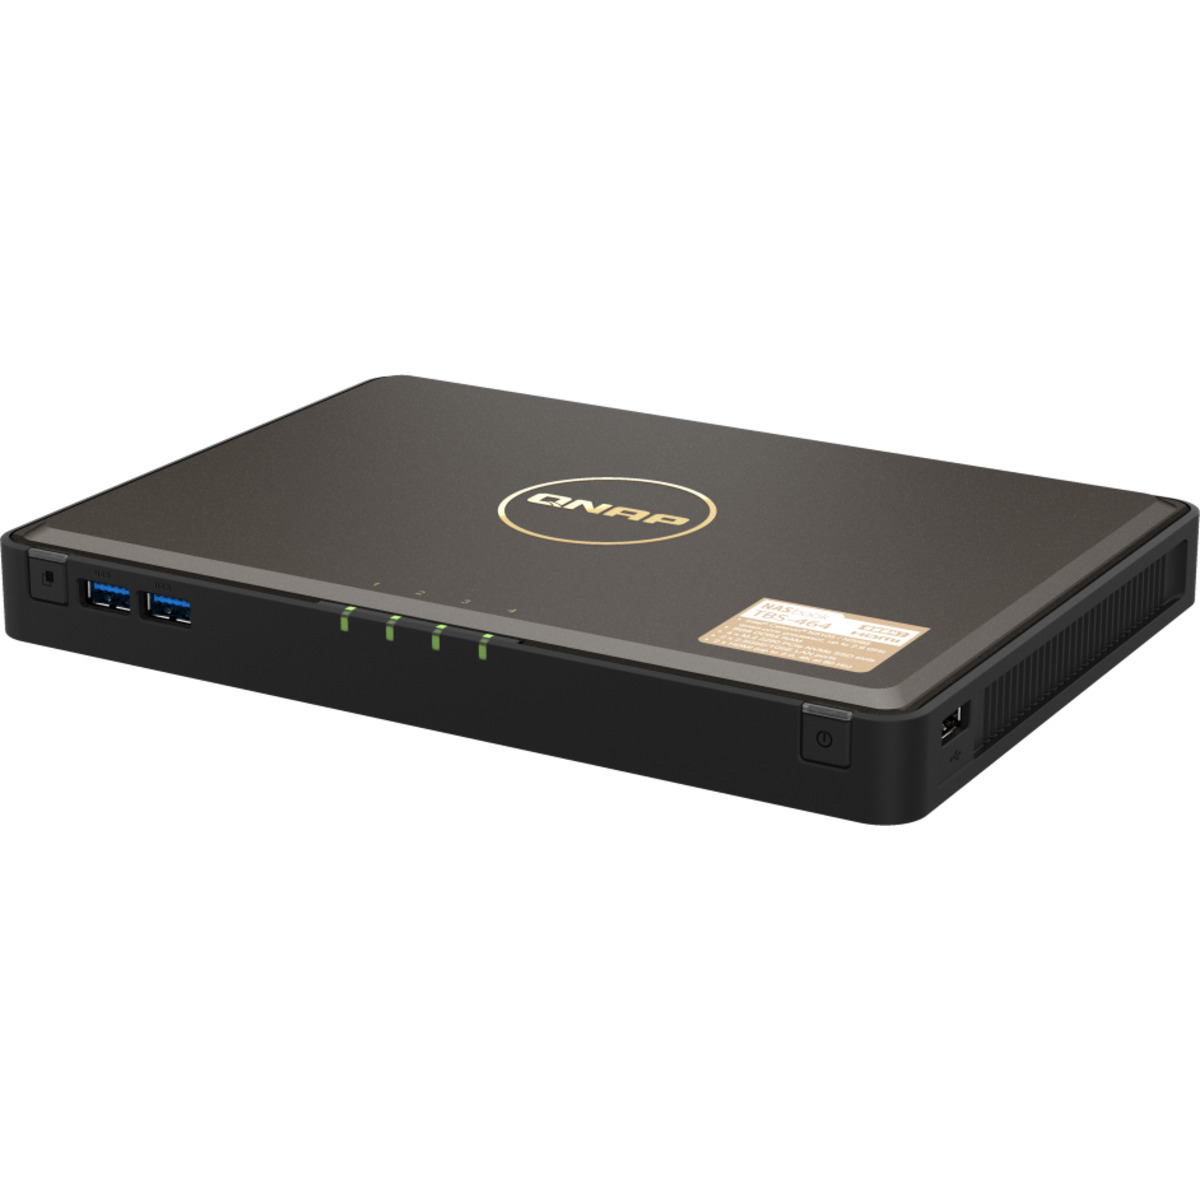 buy QNAP TBS-464 Desktop NAS - Network Attached Storage Device Burn-In Tested Configurations - nas headquarters buy network attached storage server device das new raid-5 free shipping usa TBS-464